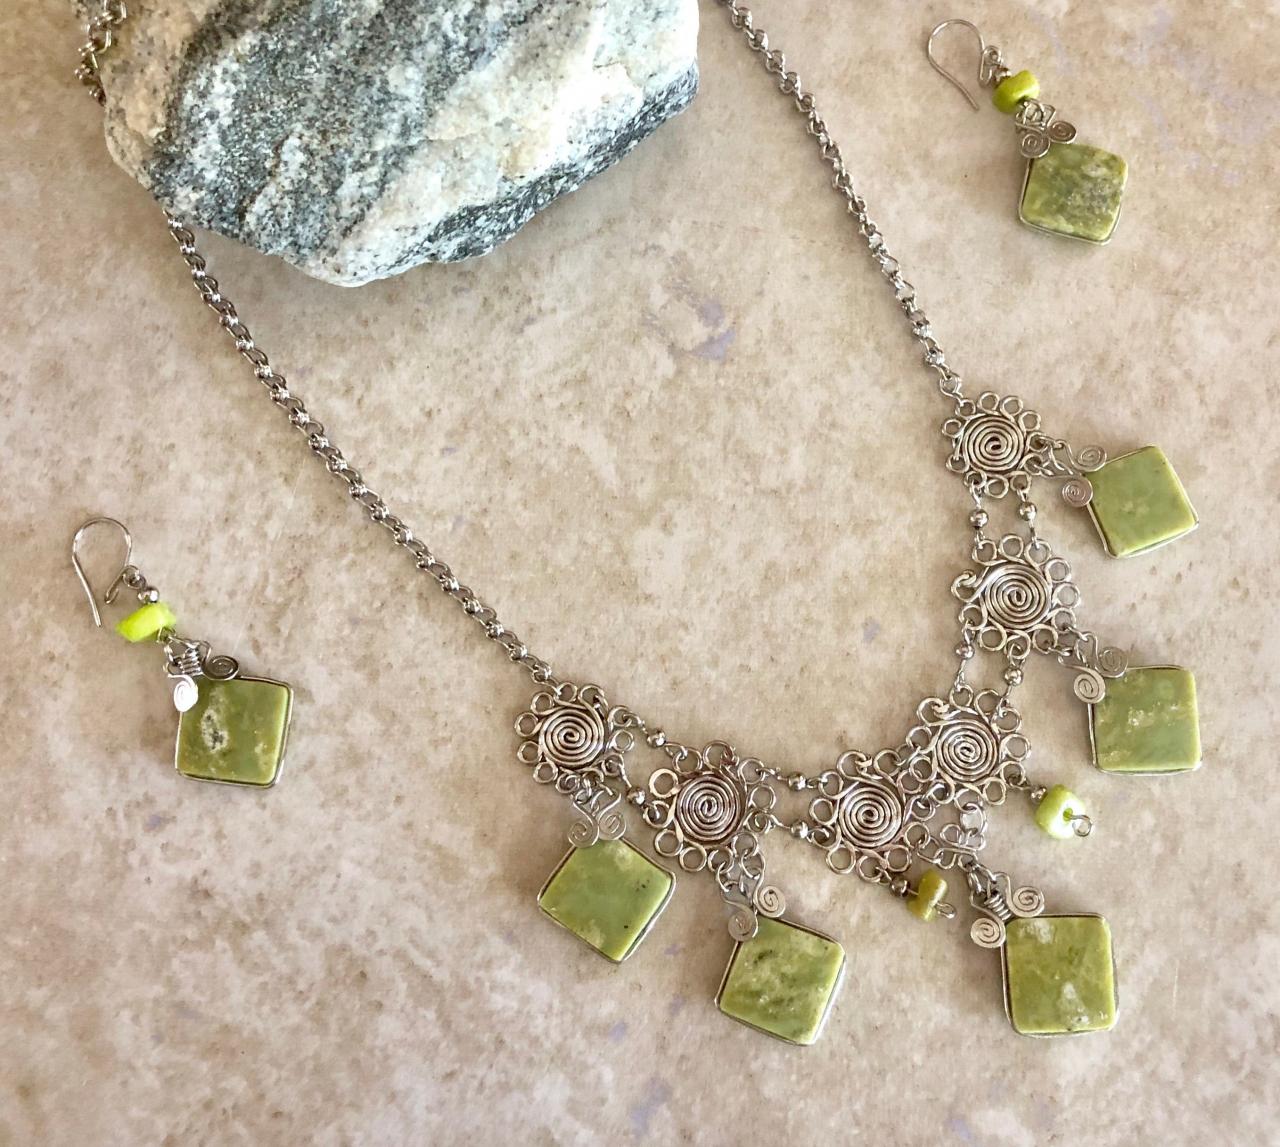 Diamond Shape Necklace And Earrings, Geometric Necklace, Light Green Serpentine Necklace, Chandelier Necklace, Alpaca Silver Necklace